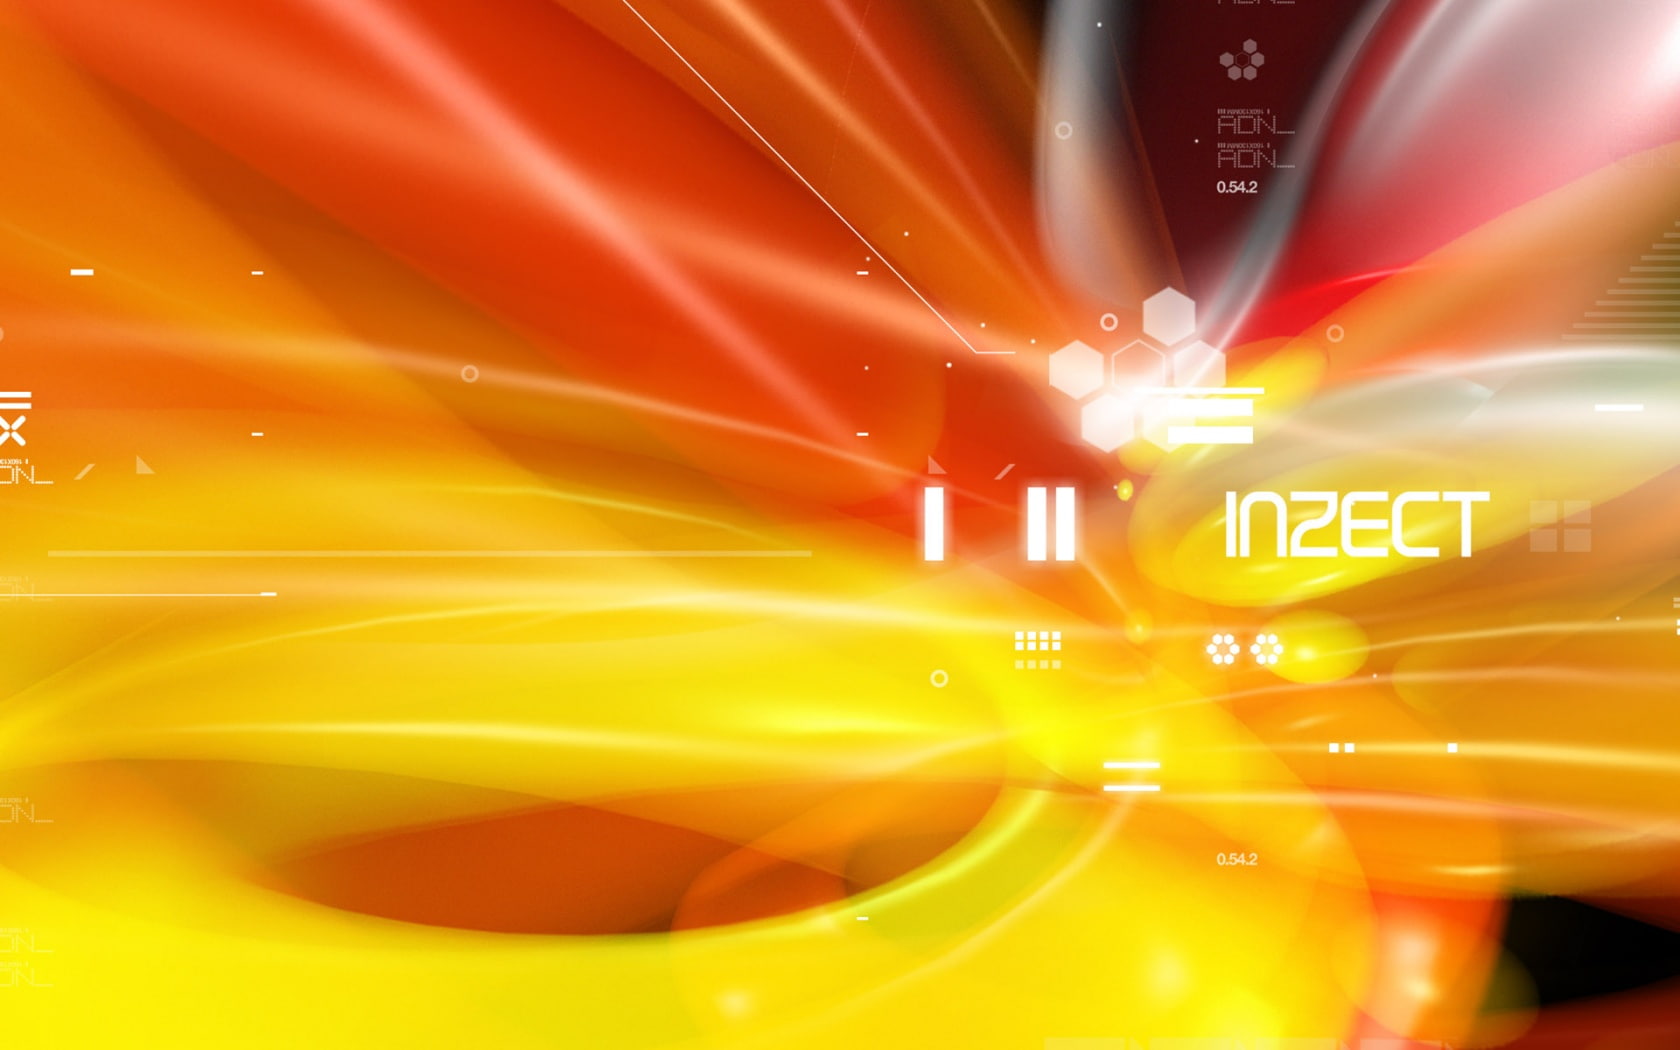 Fire Whirlpool HD, inzect graphic artwork, abstract, 3d